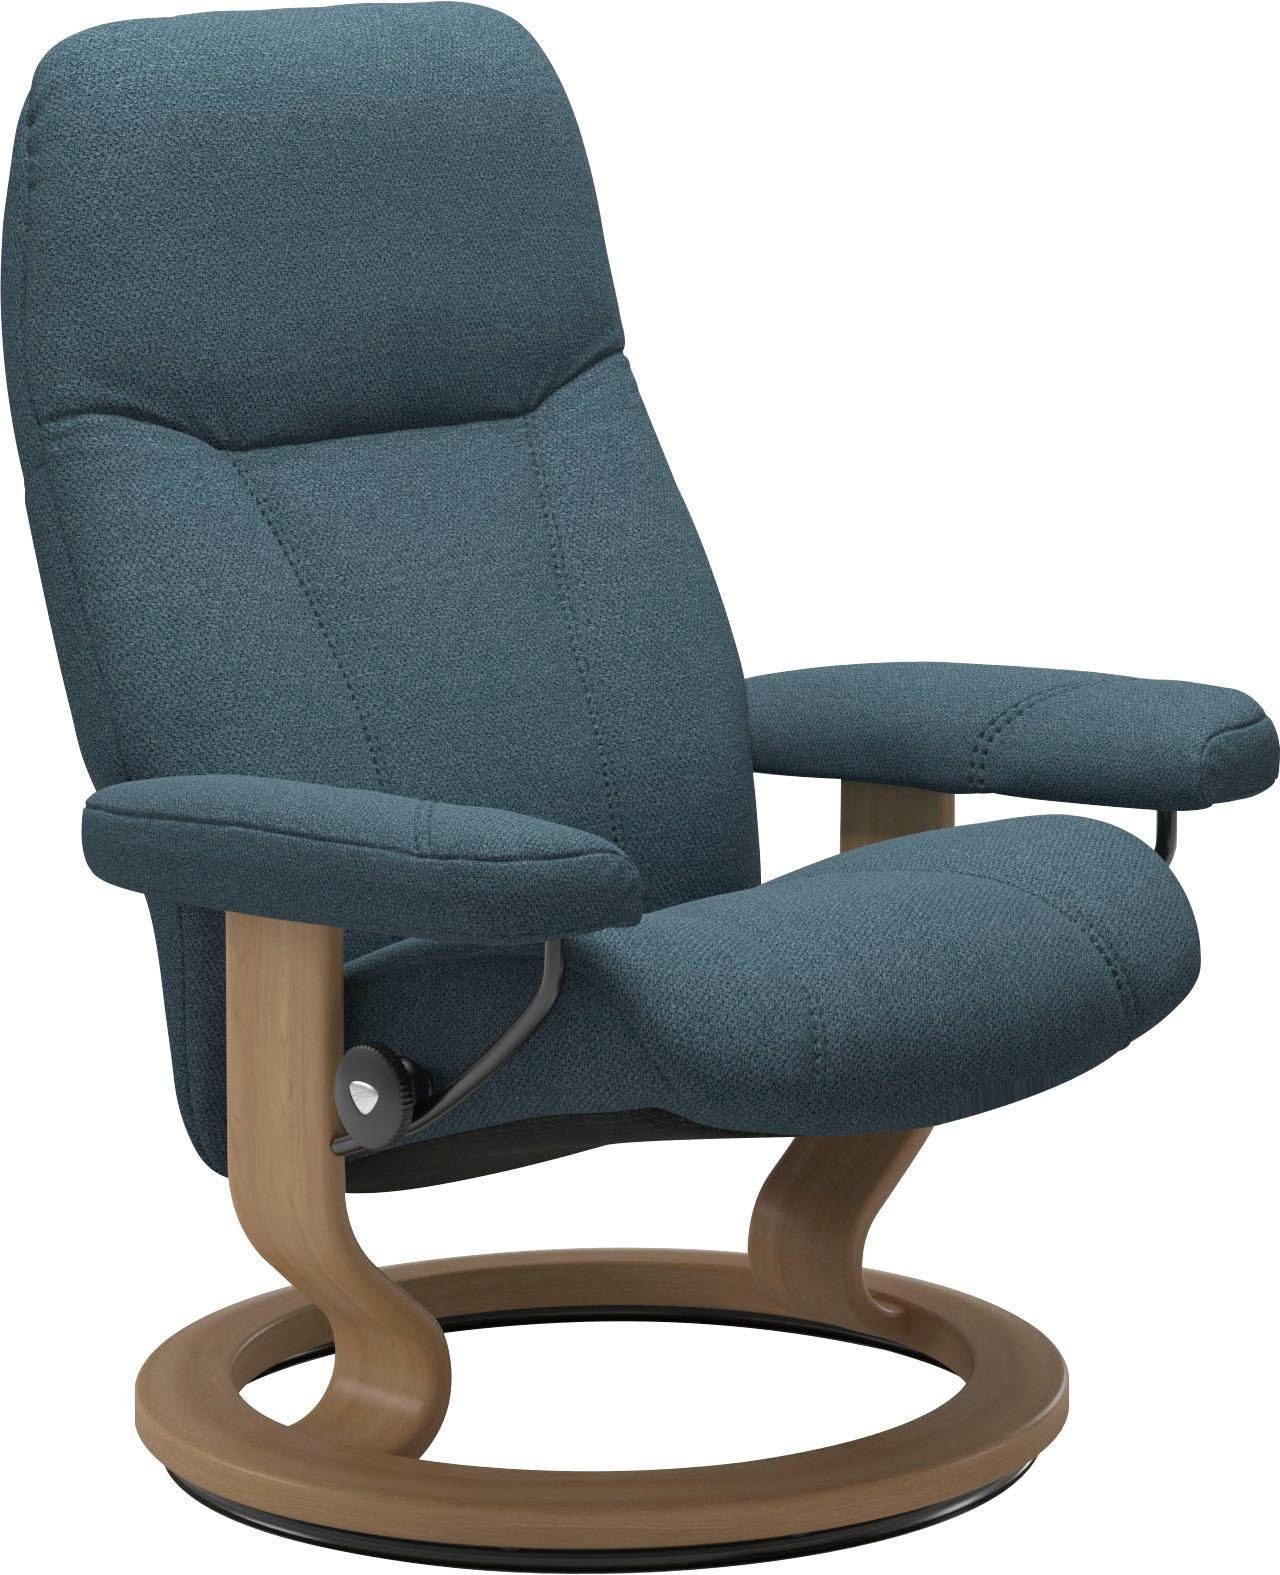 Stressless® Relaxsessel Consul, mit Classic Base, Größe M, Gestell Eiche | Funktionssessel